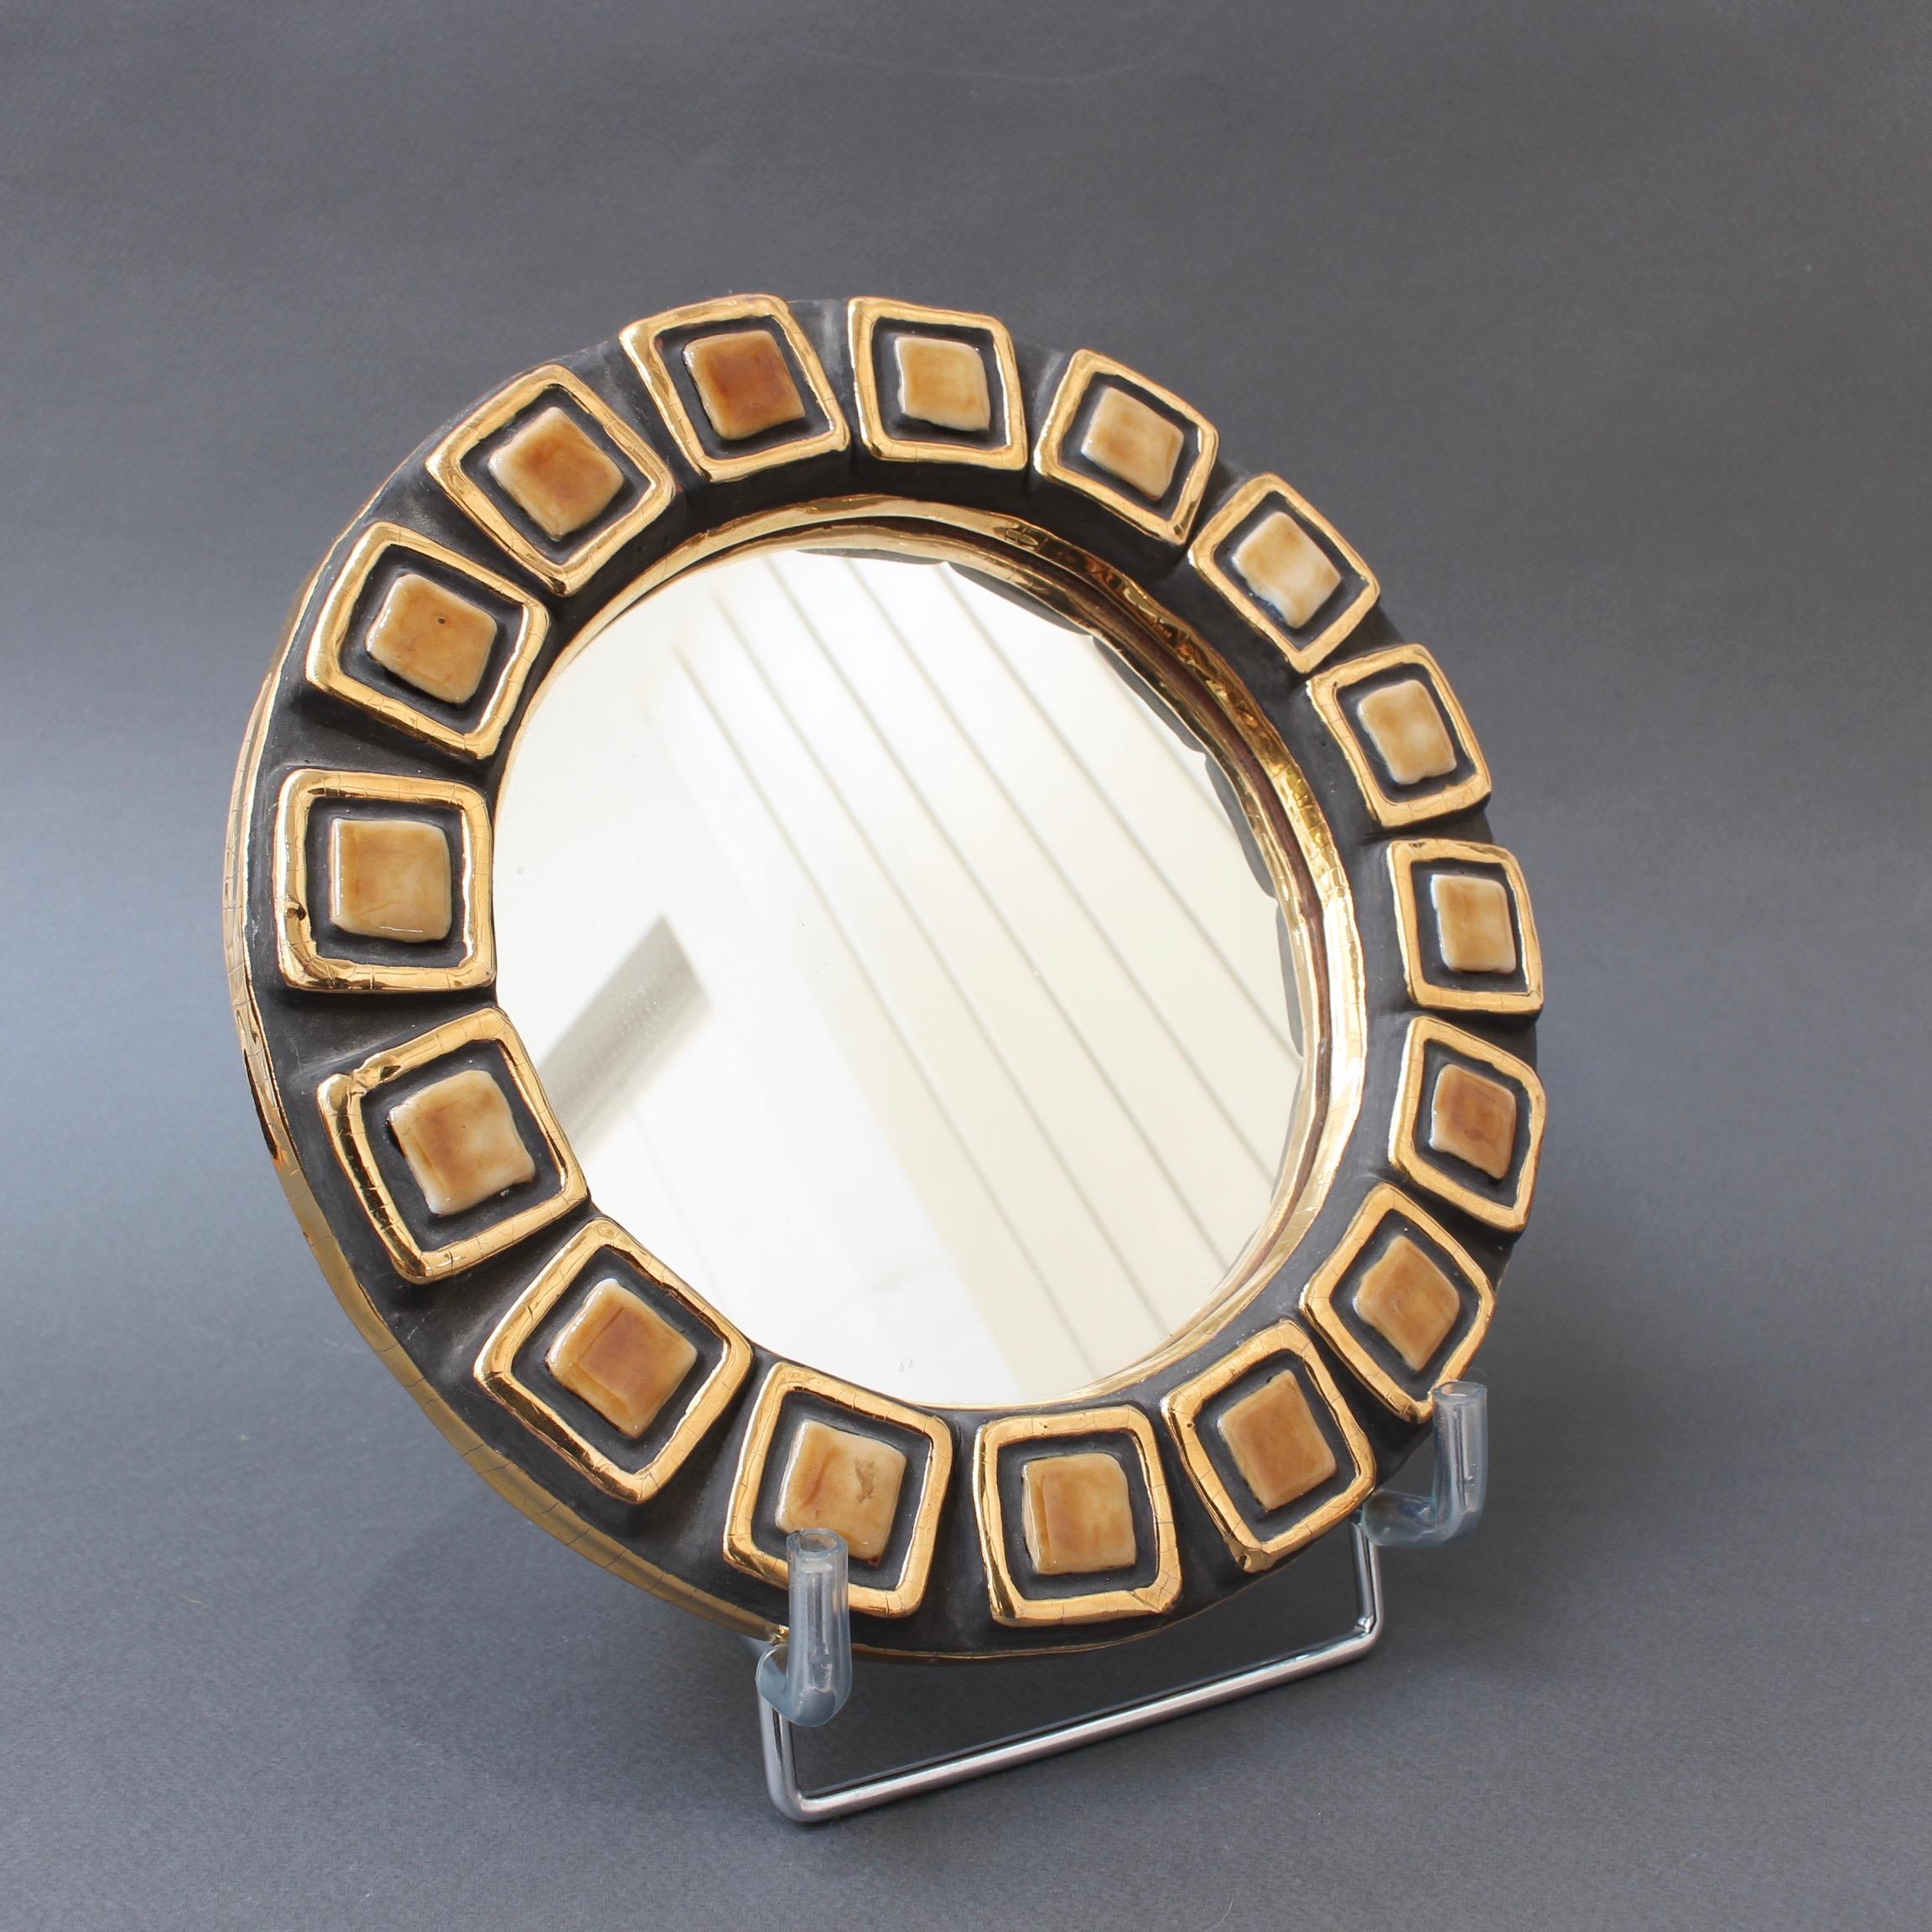 Ceramic wall mirror with a square-within-a-square motif (1952), by Mithé Espelt, titled 